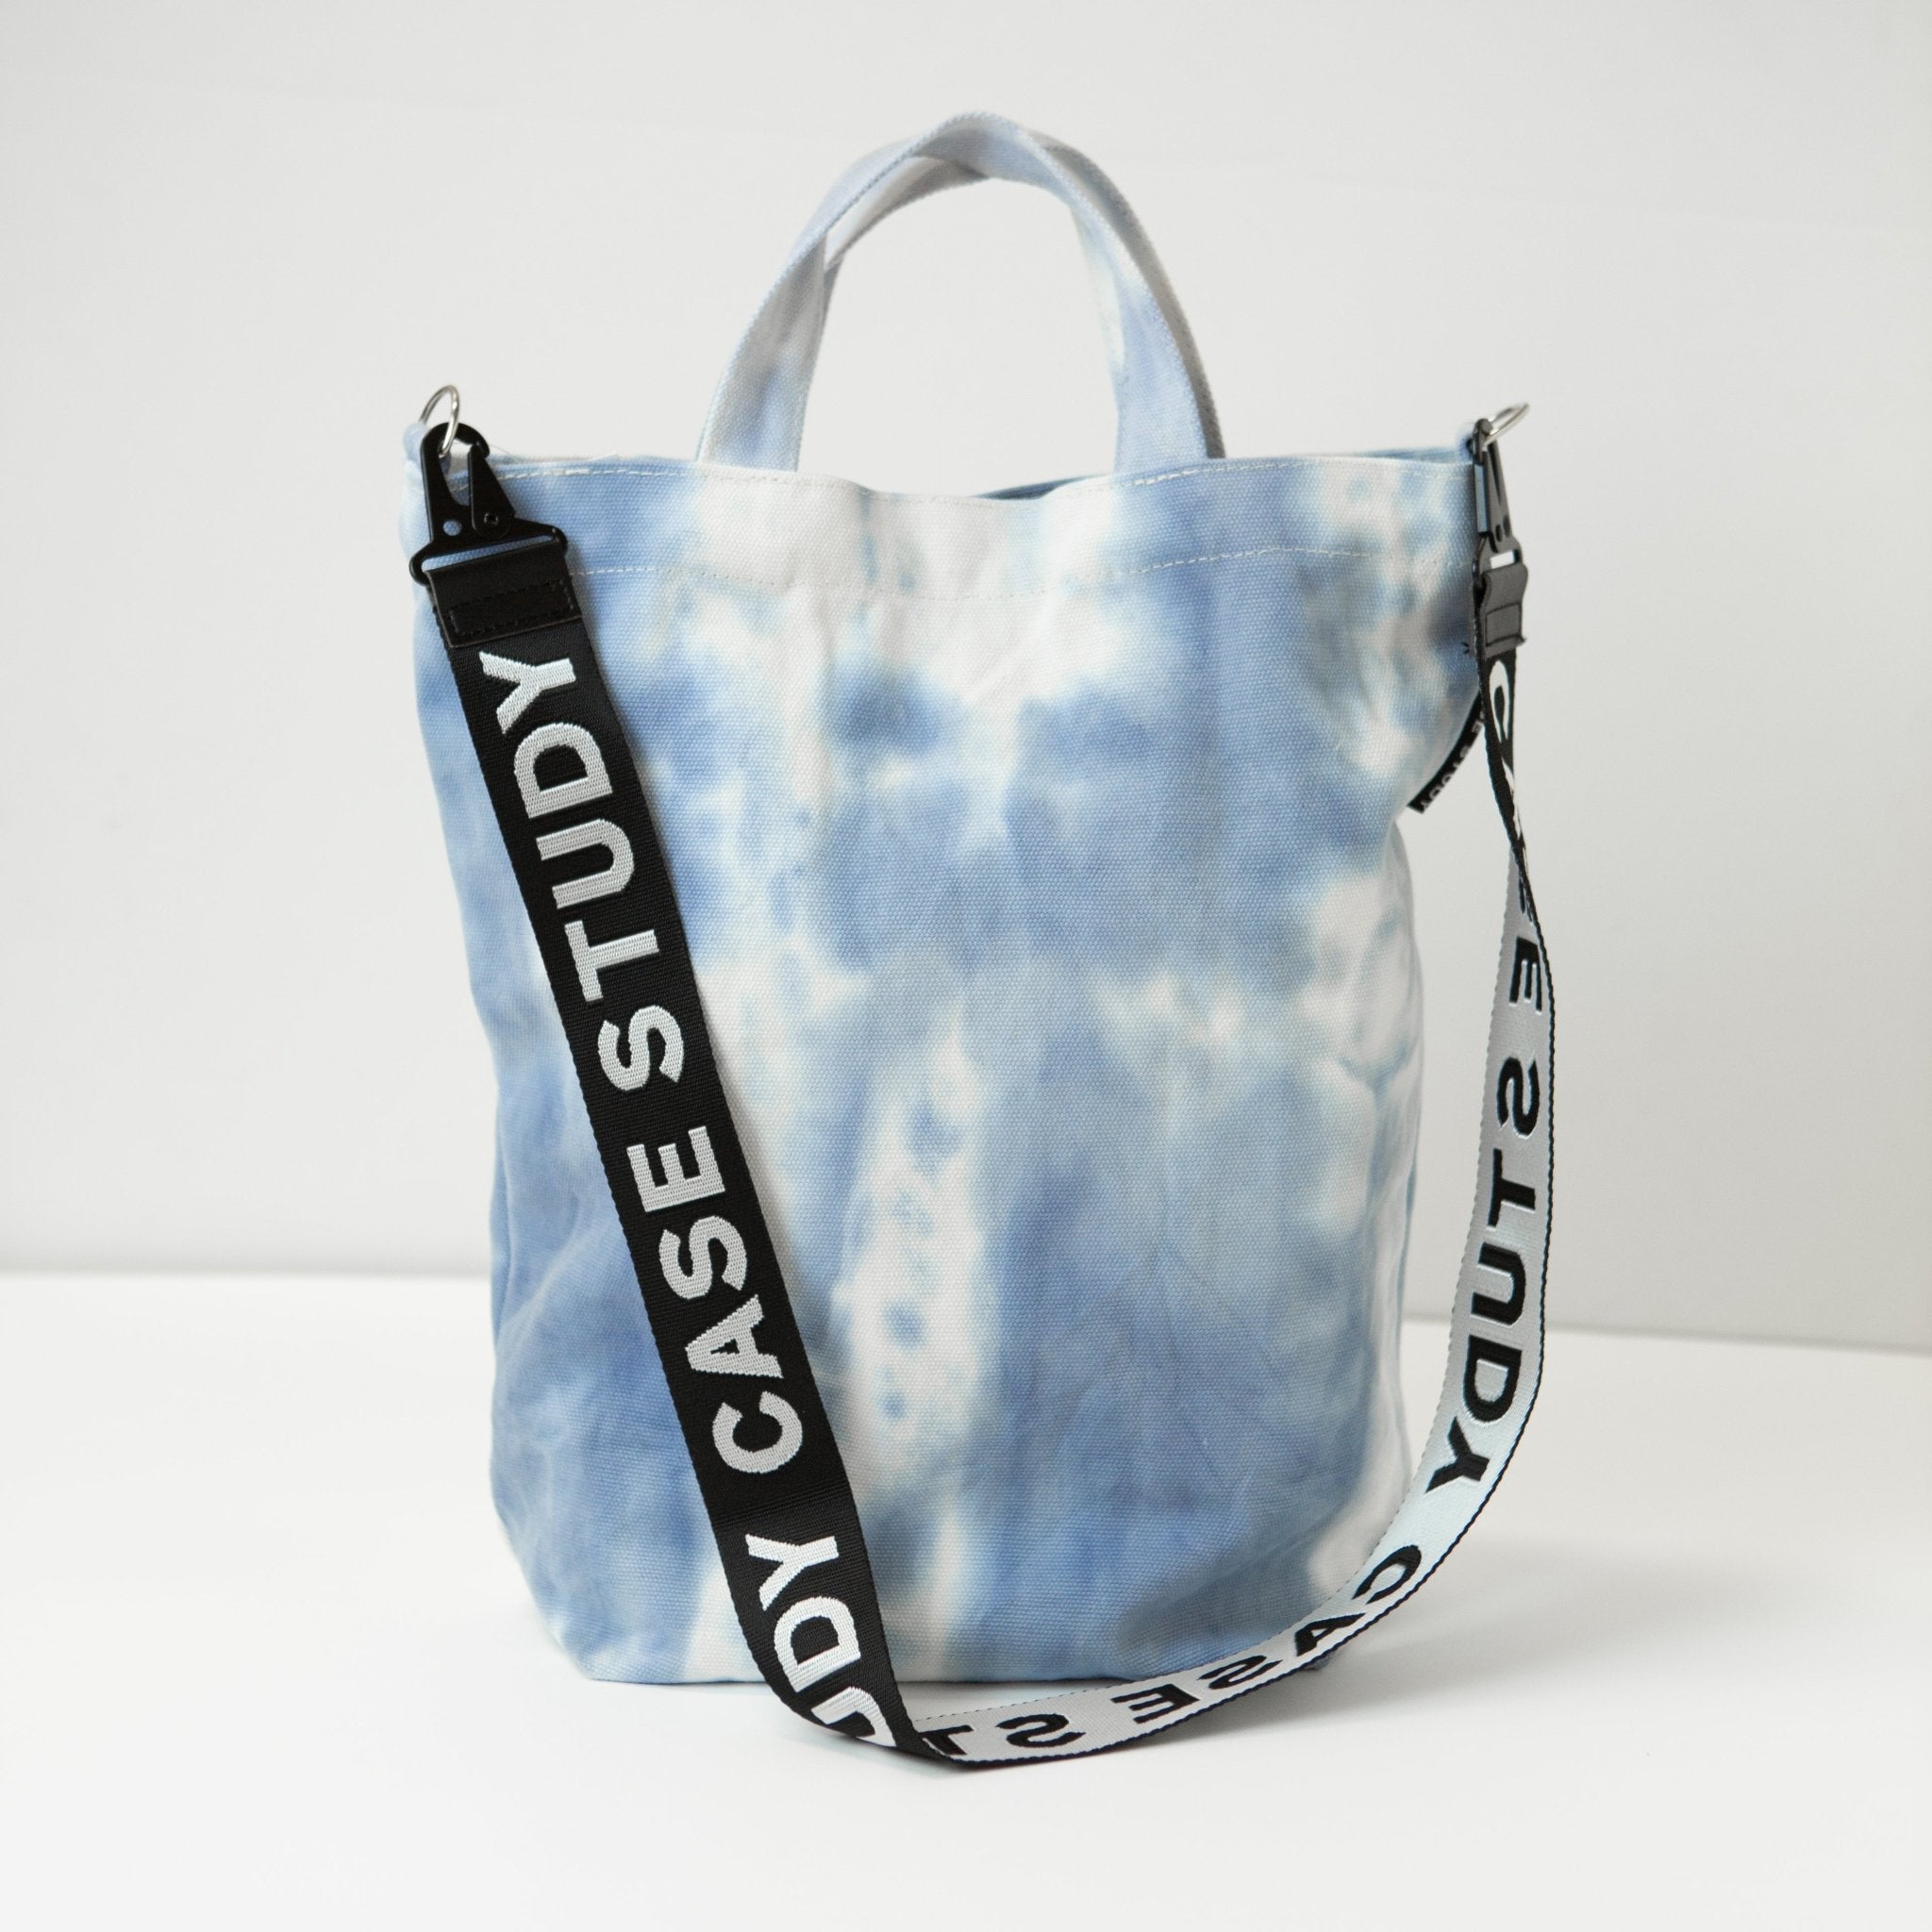 a tie dyed canvas tote in a pale blue and white color with a black and white case Study crossbody strap